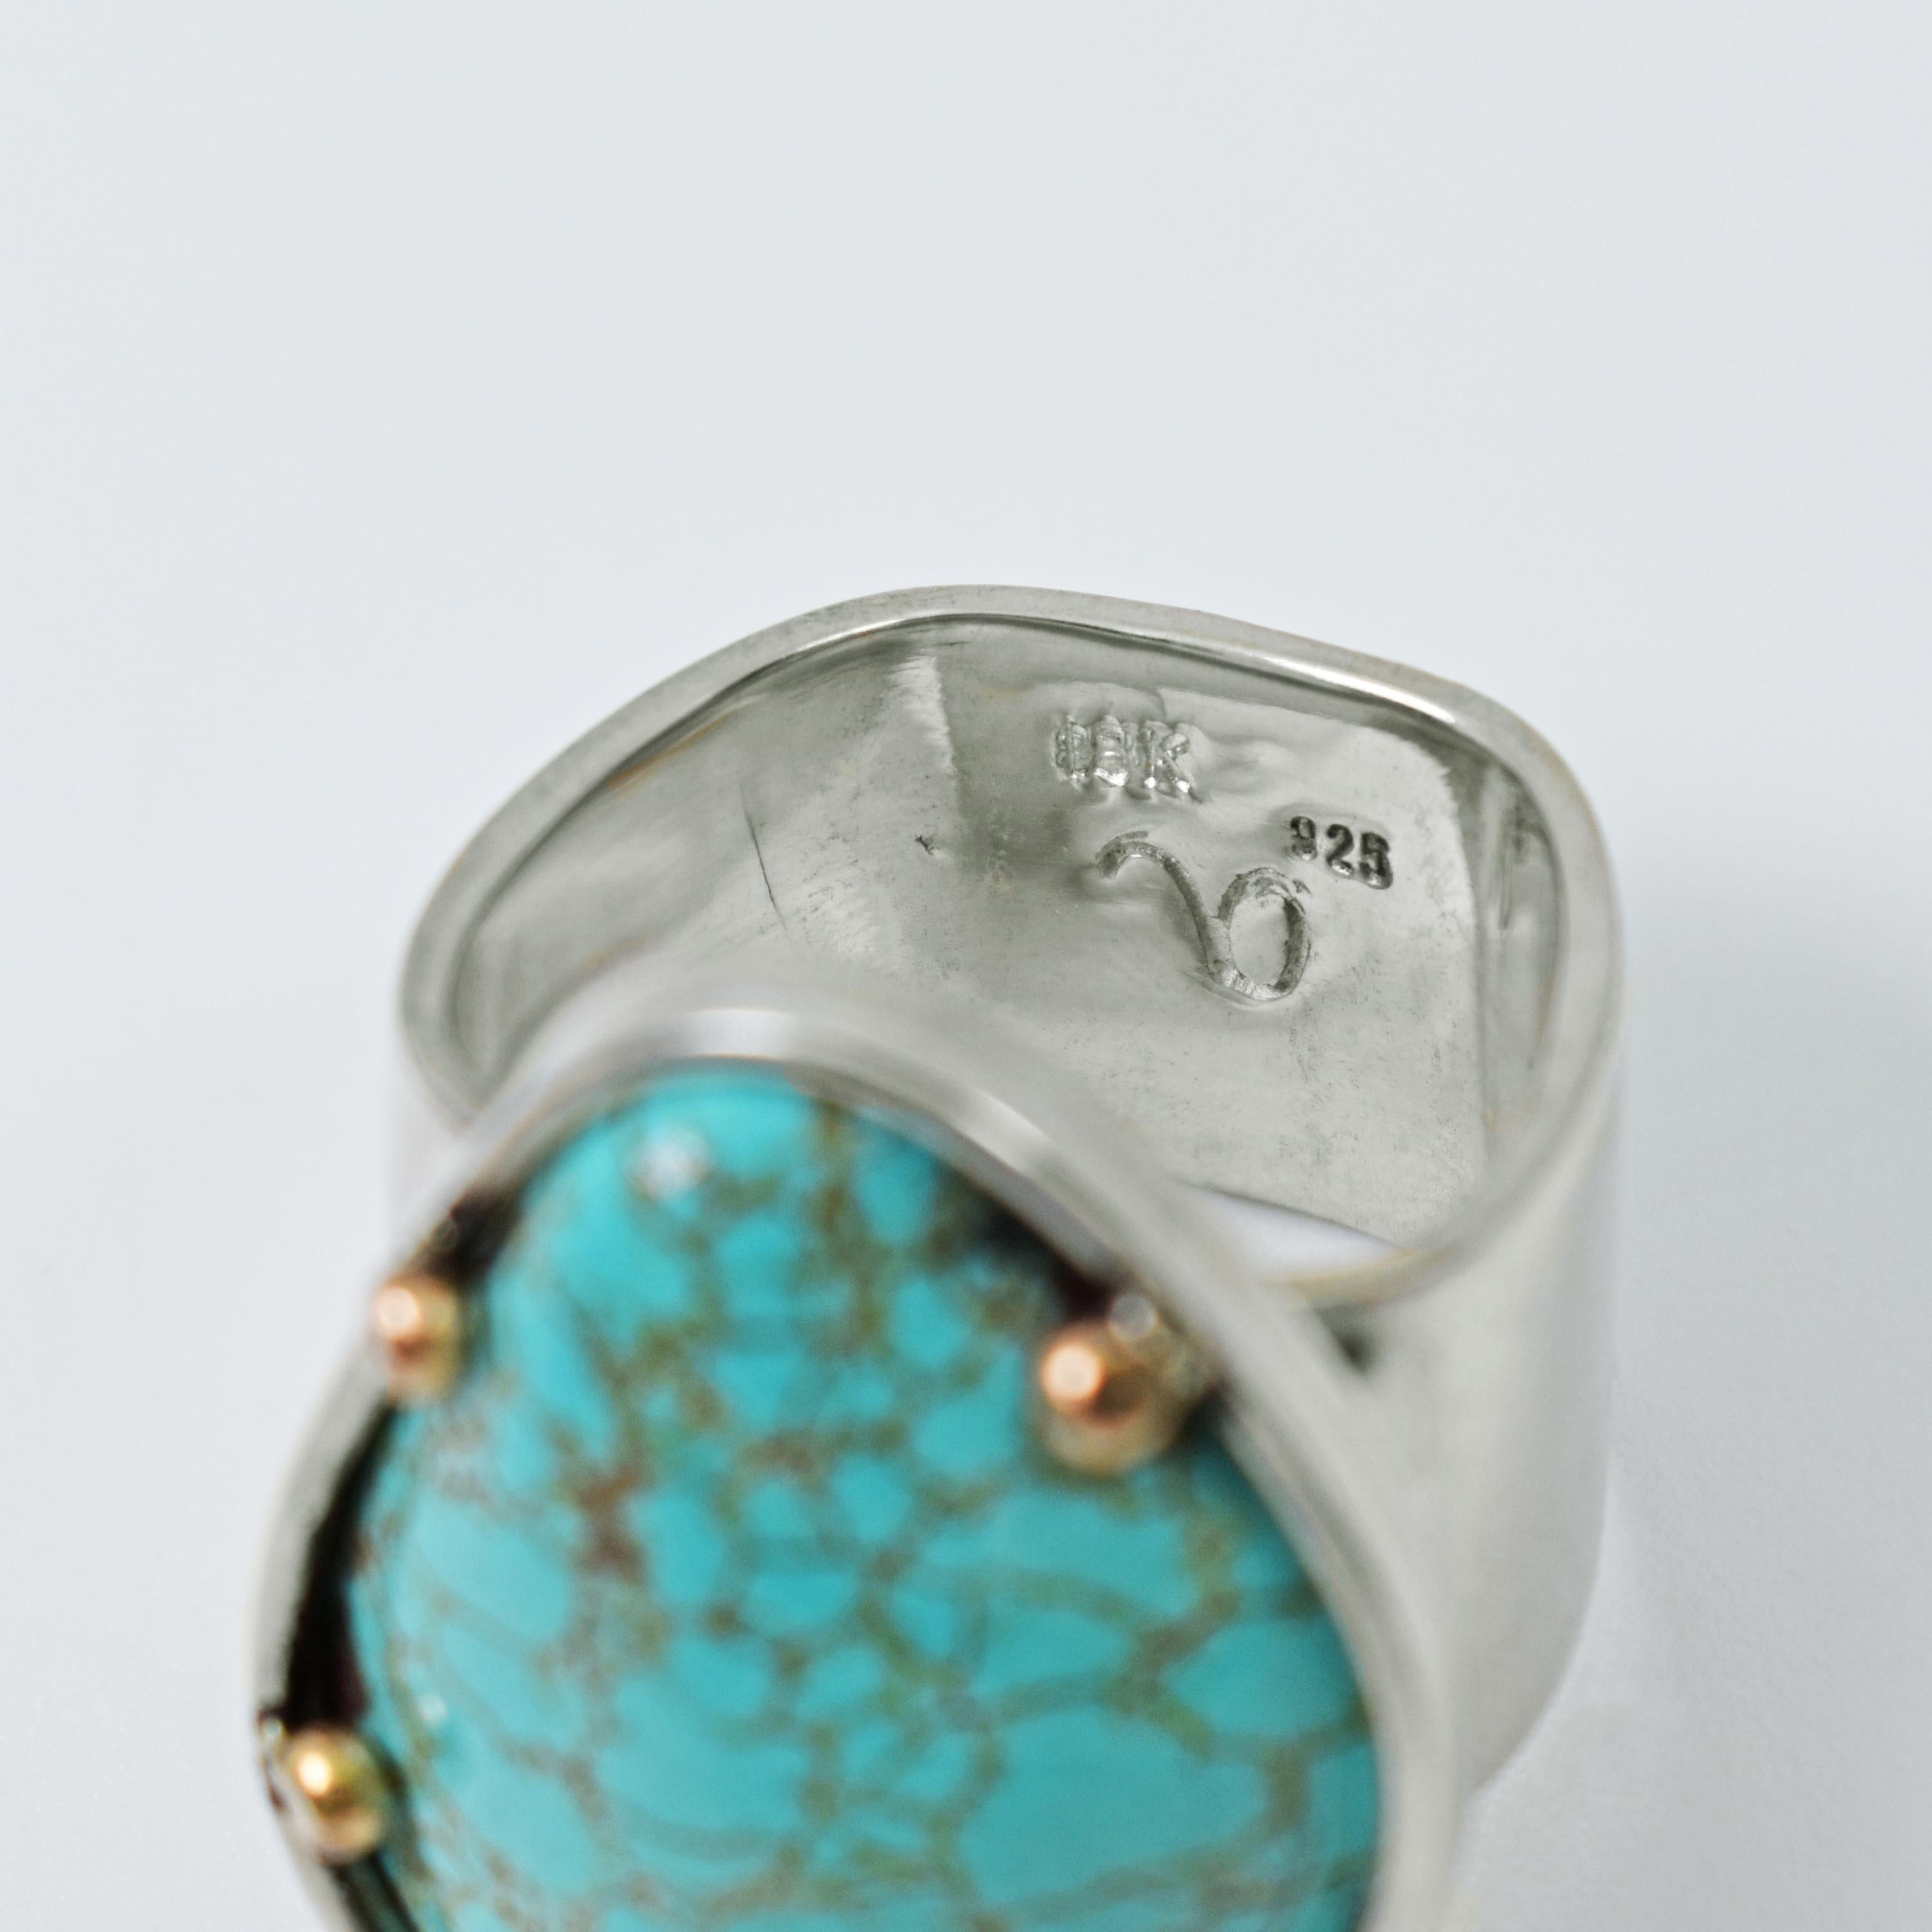 Cabochon Russian Turquoise Sterling Silver and 14 Karat Gold Two-Tone Cocktail Ring